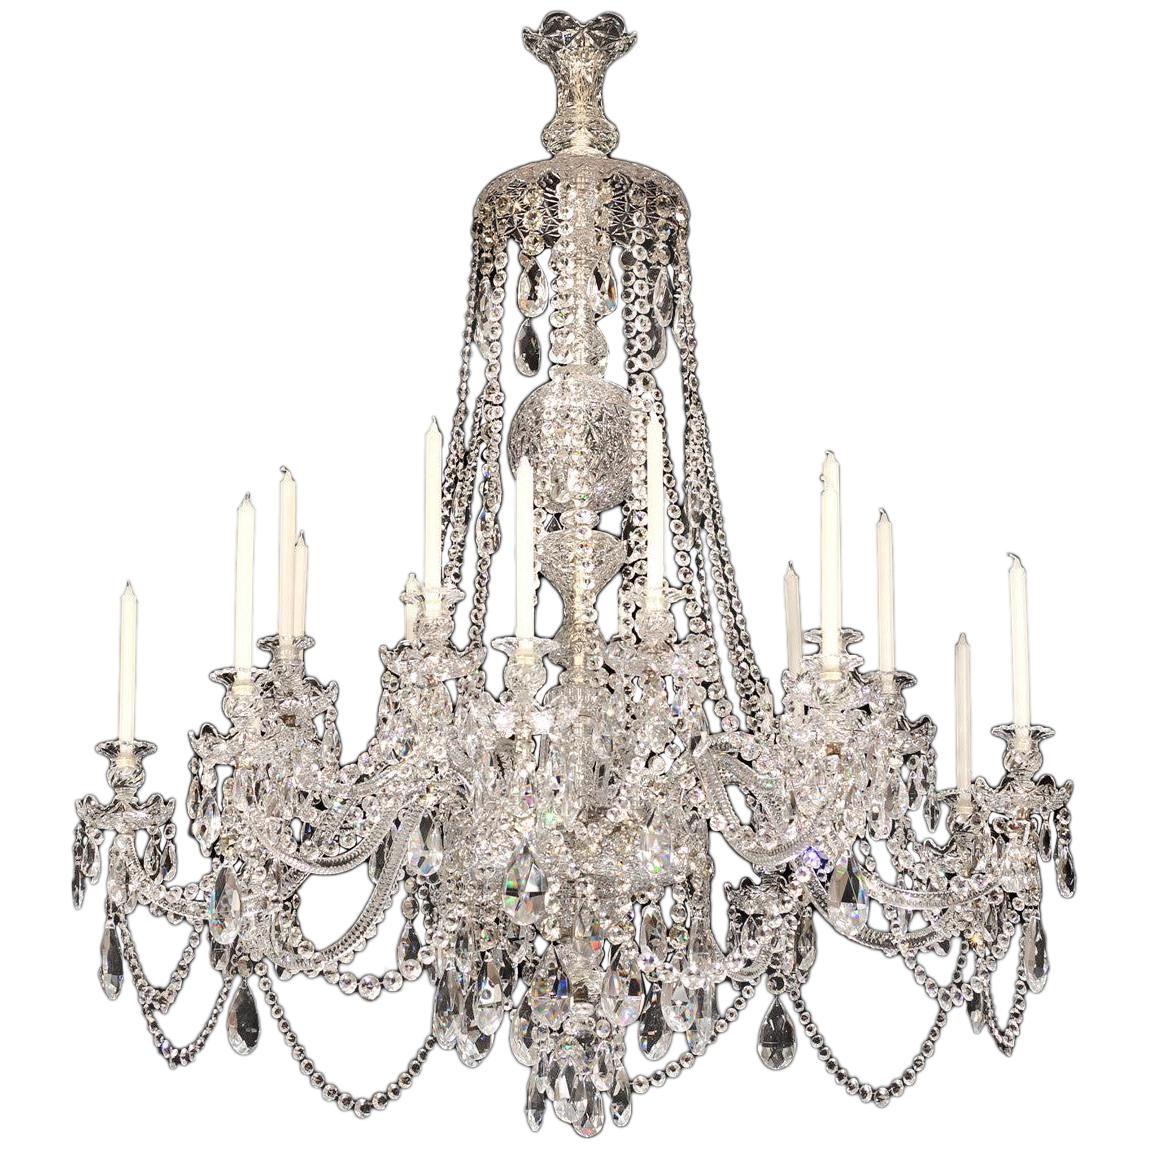 Superb 19th Century Russian All Handcut Crystal Chandelier with 18 Lights For Sale